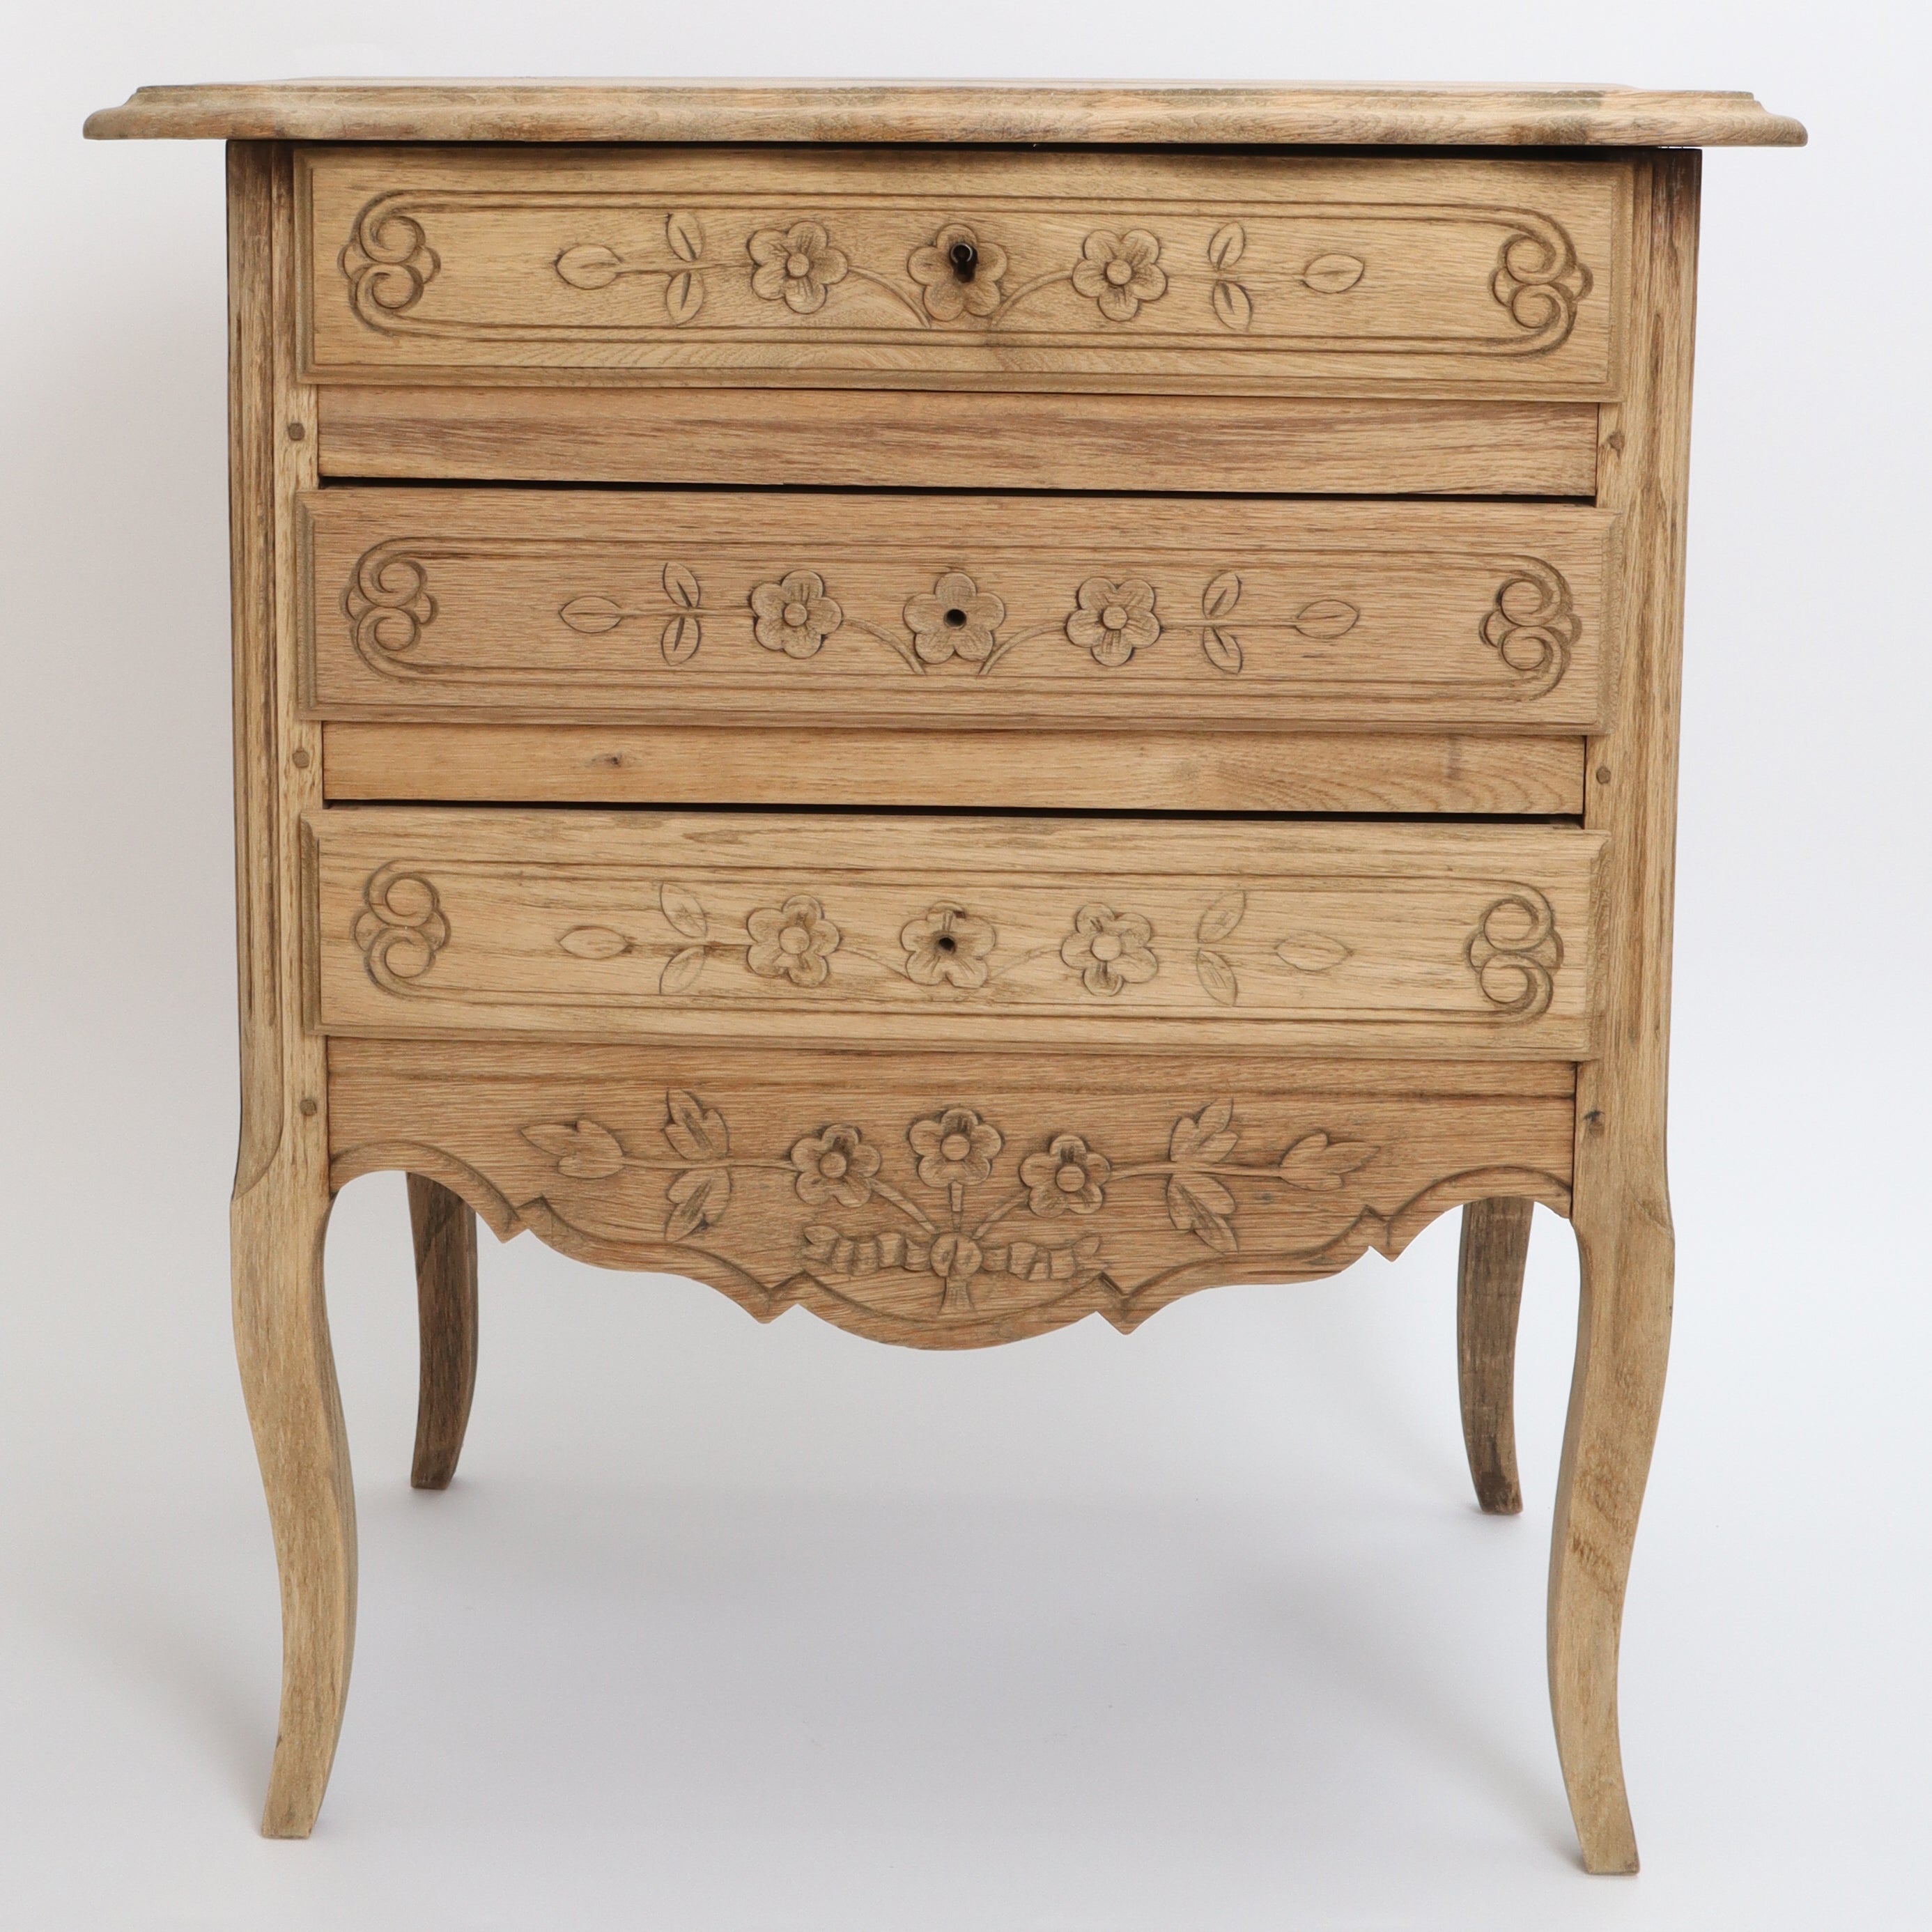 Pair of French Bleached Oak Nightstands c1920